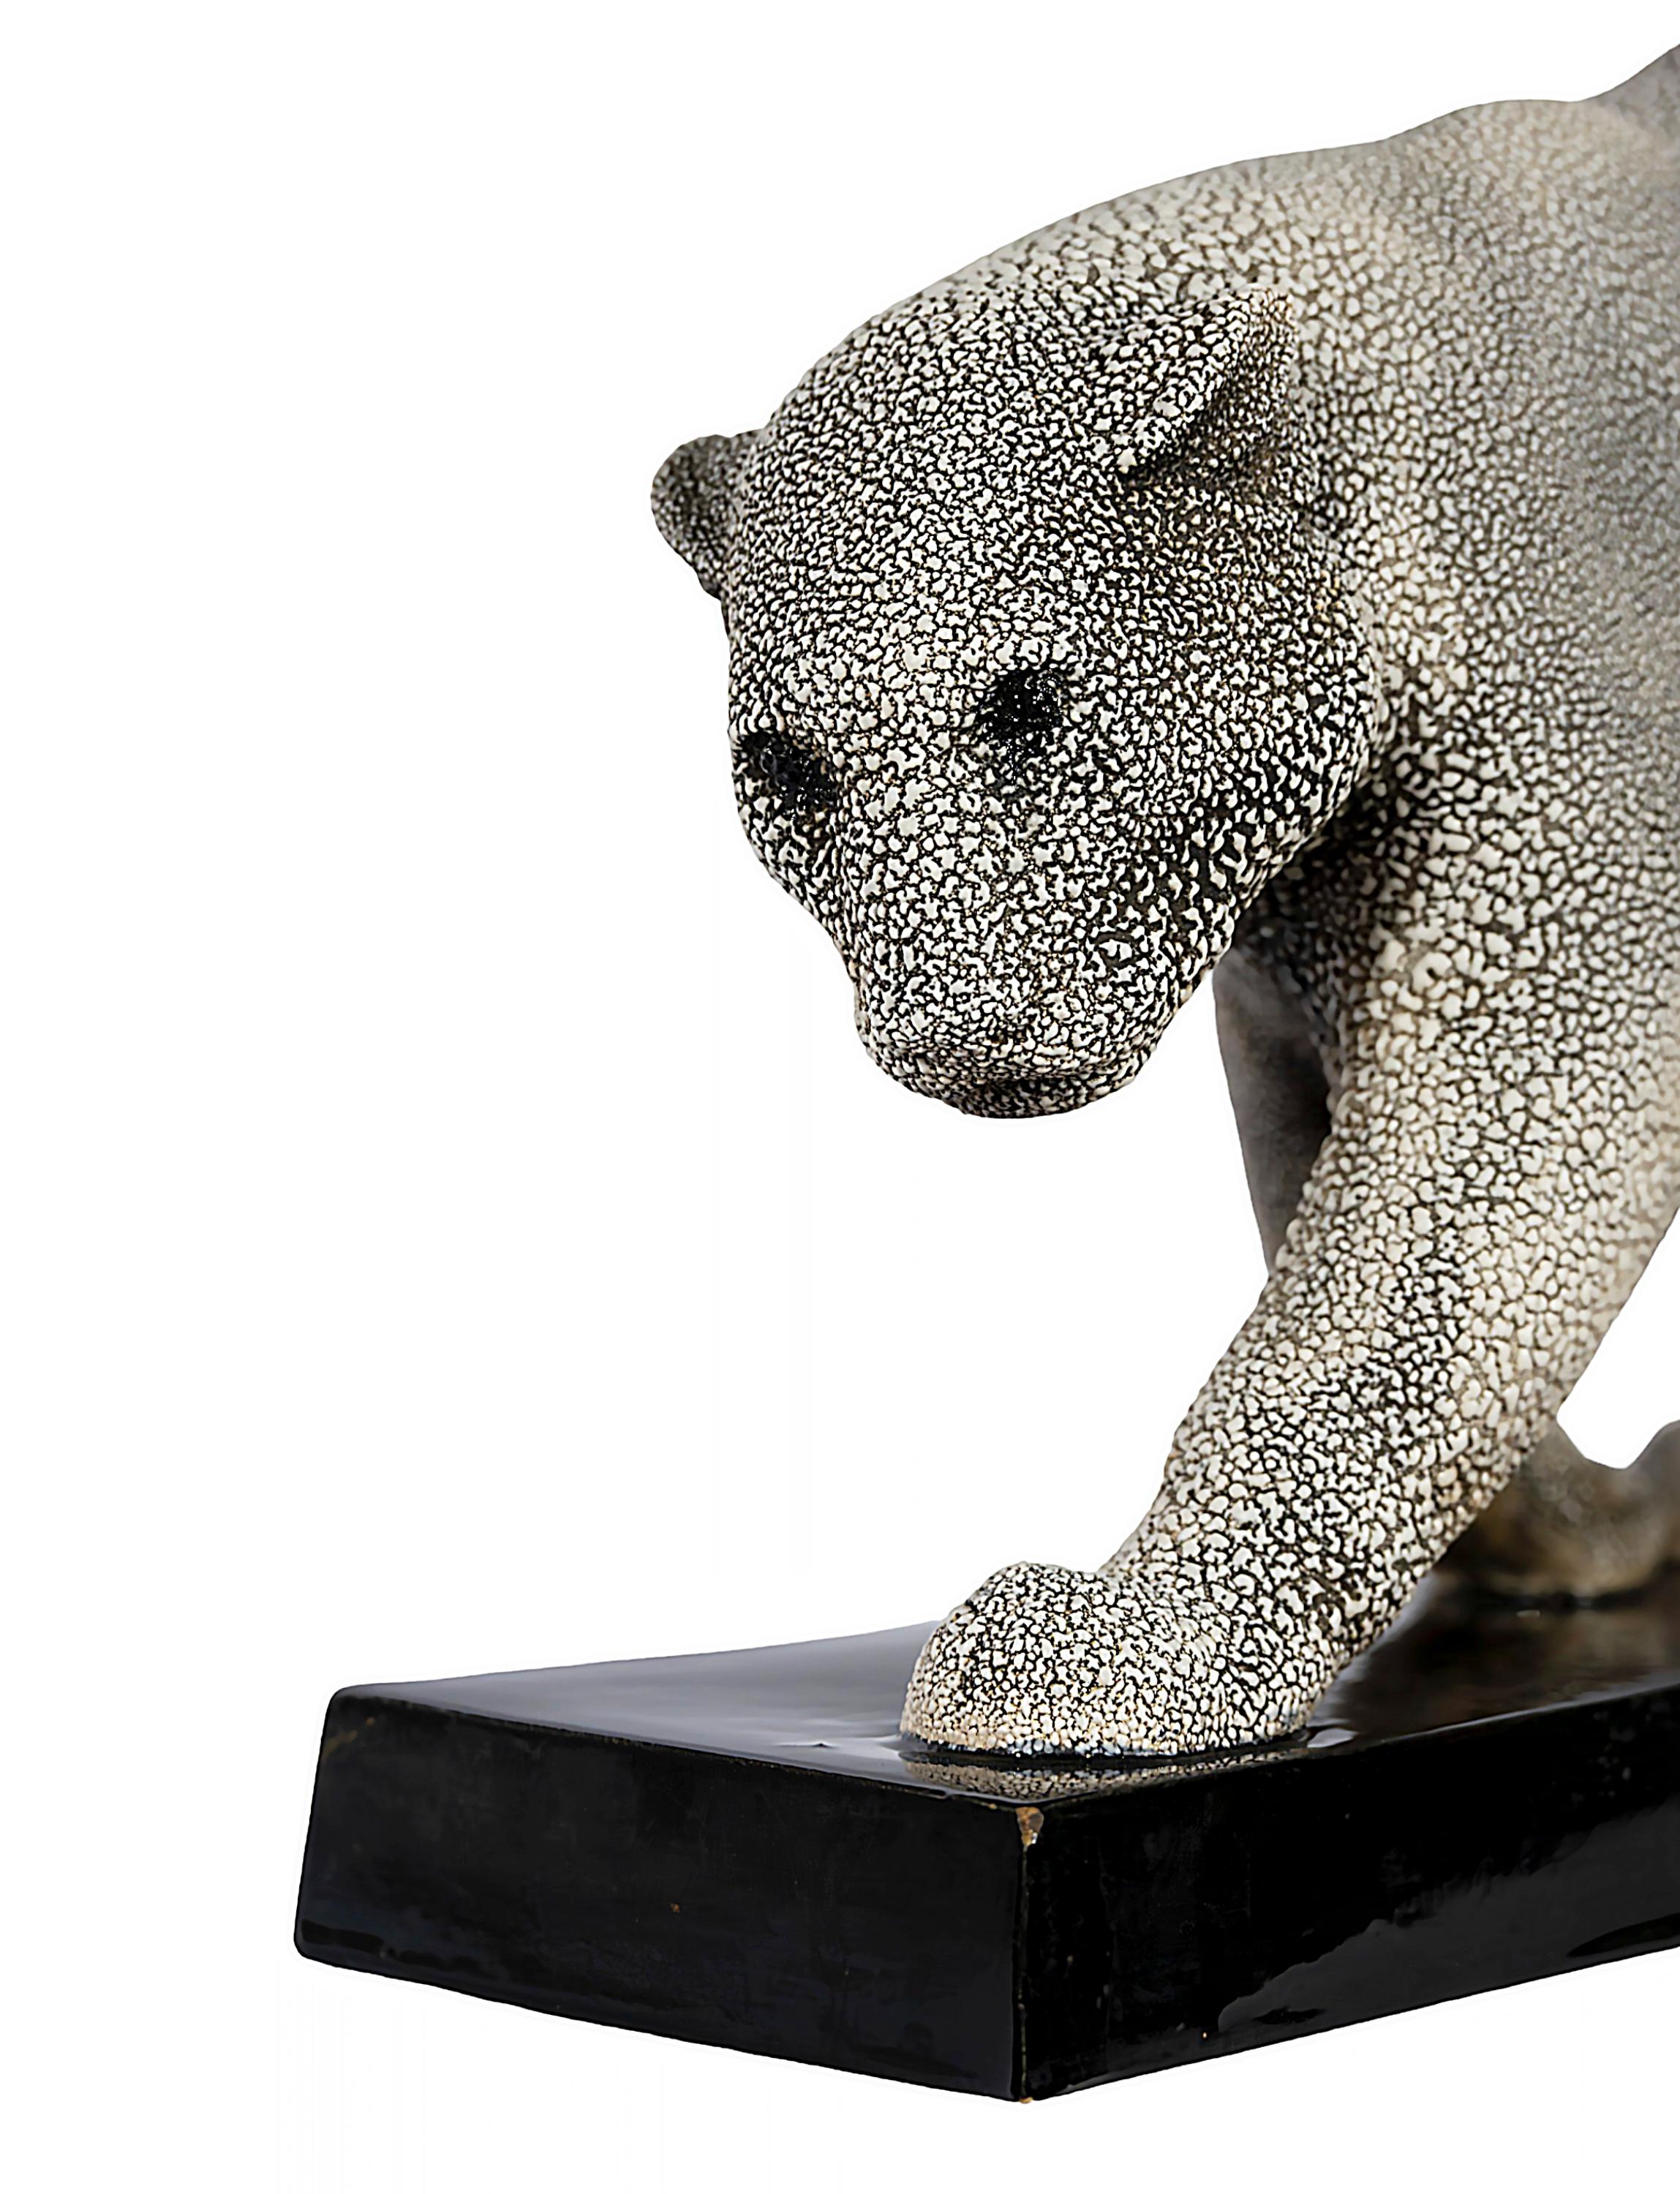 French Art Deco Ceramic Panther Sculpture by G.Beauvais for Edition Kaza, 1930's For Sale 2